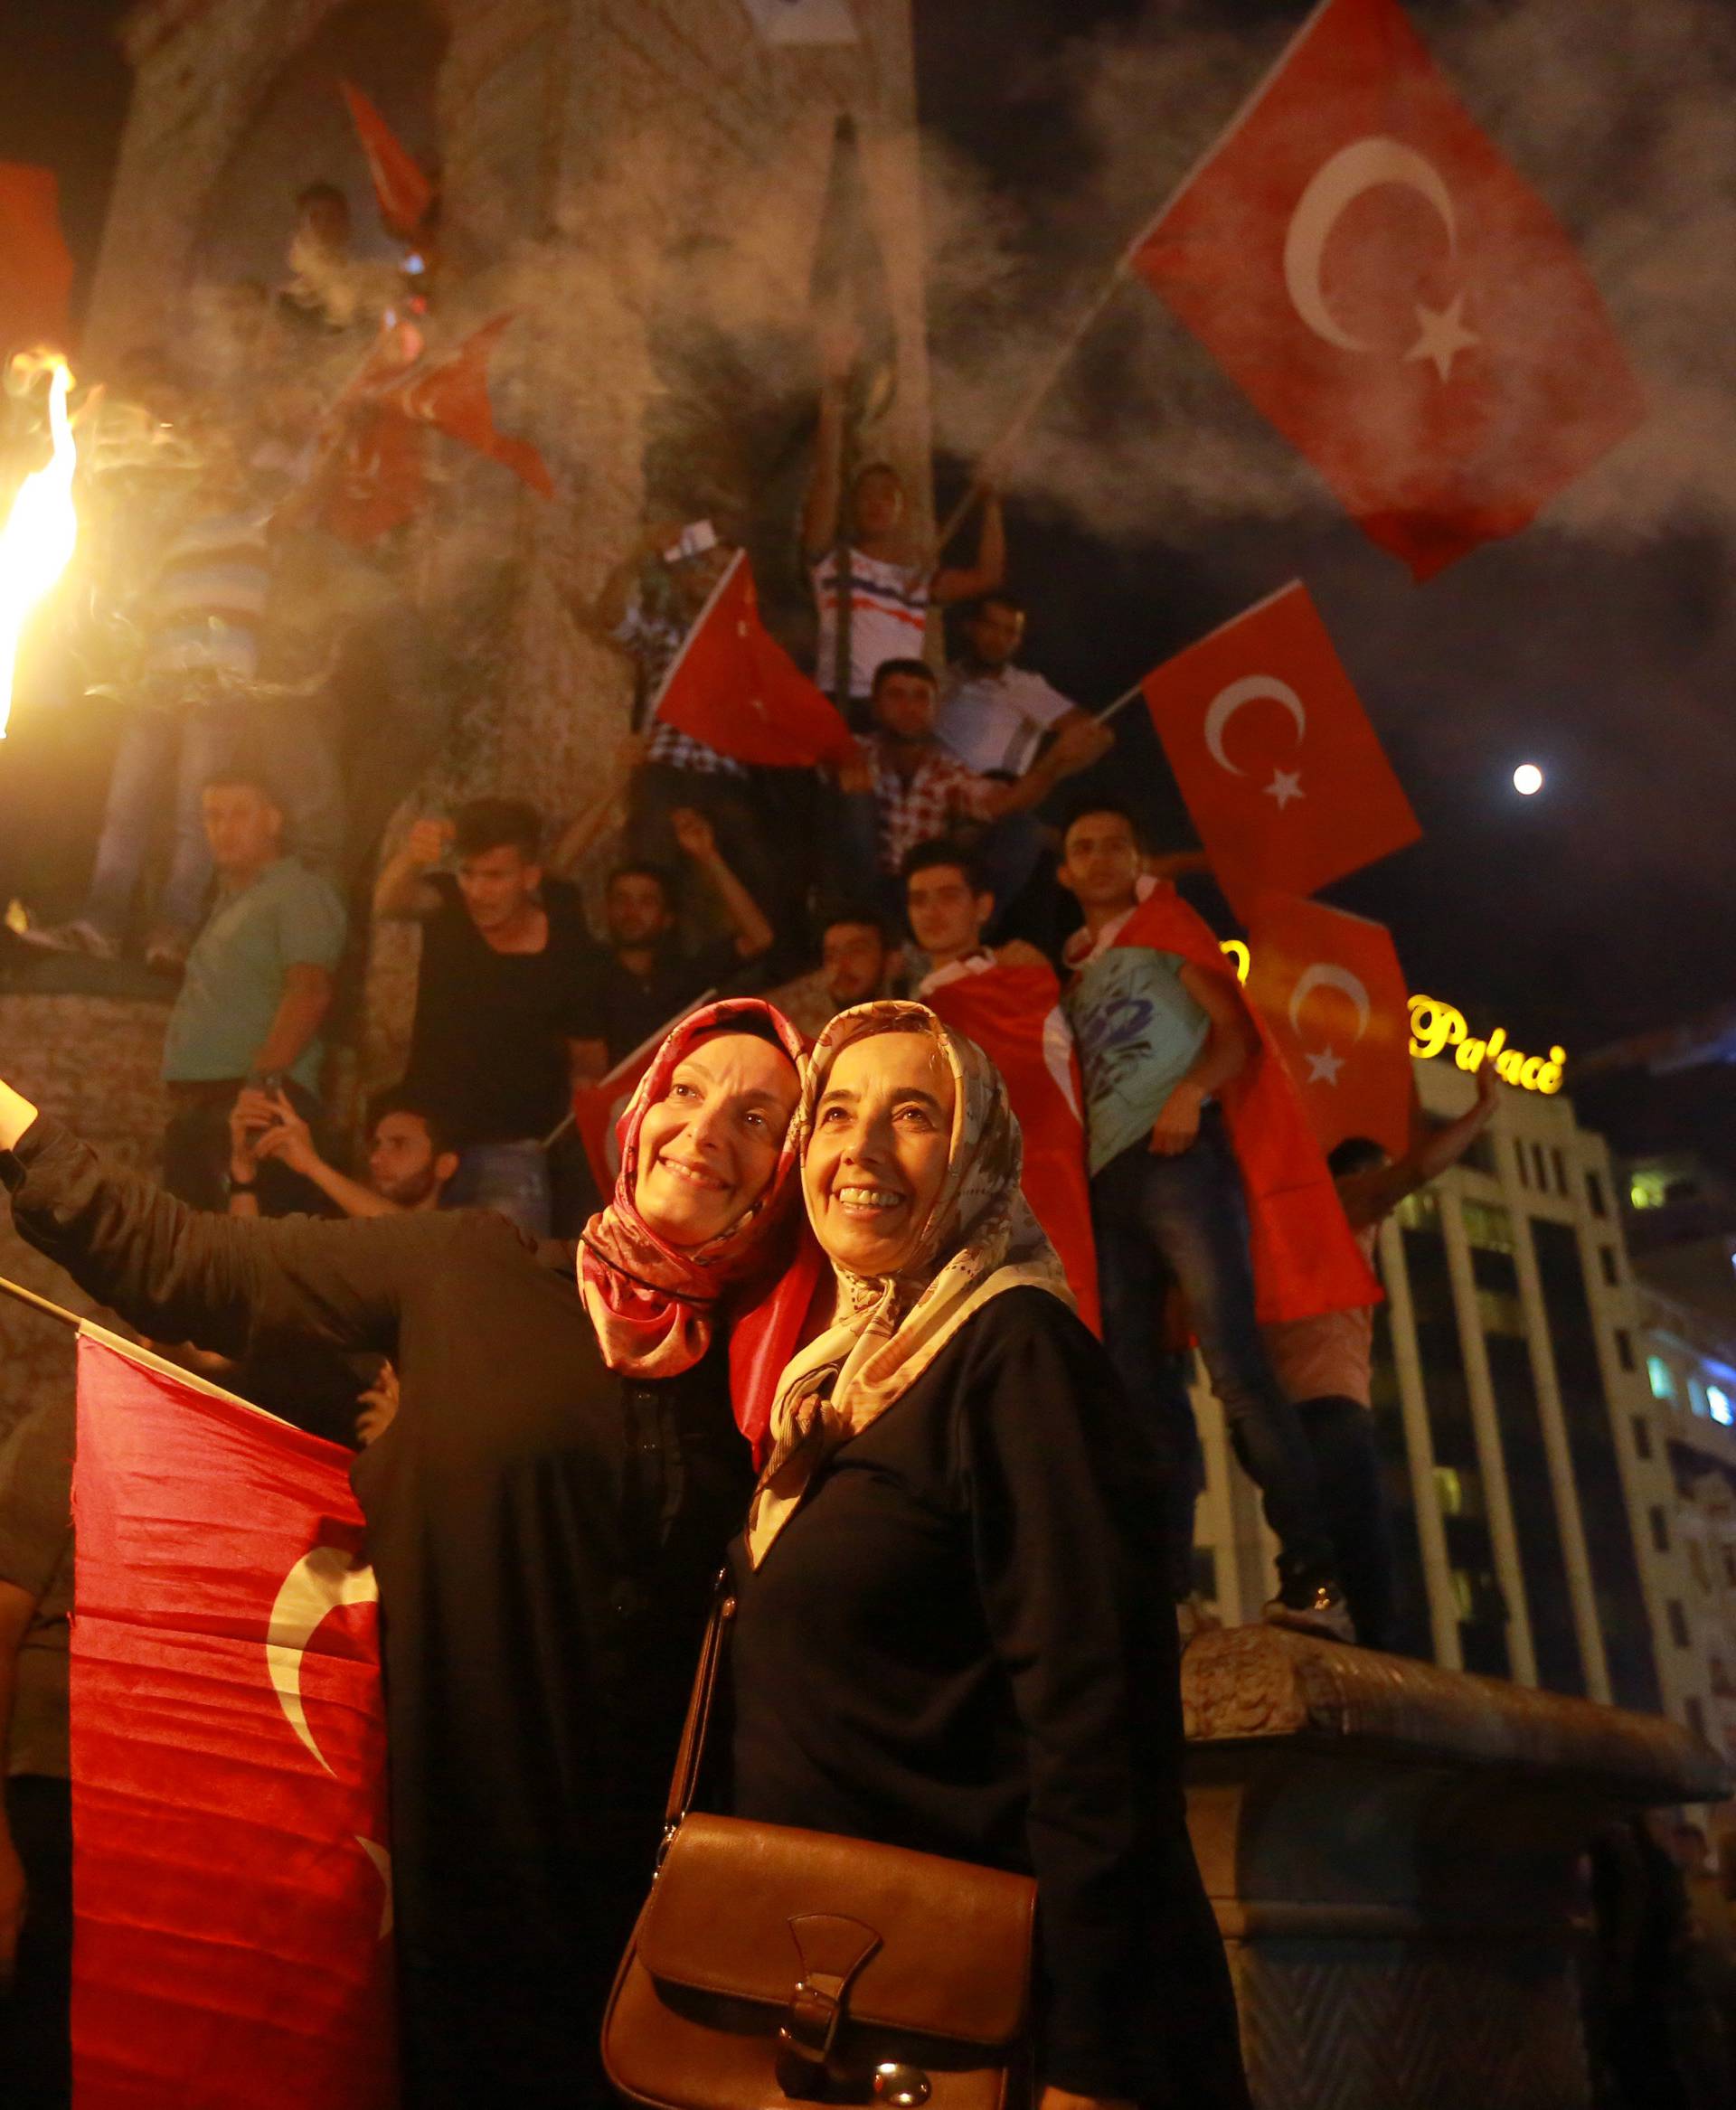 Supporters of Turkish President Erdogan gather at Taksim Square in central Istanbul